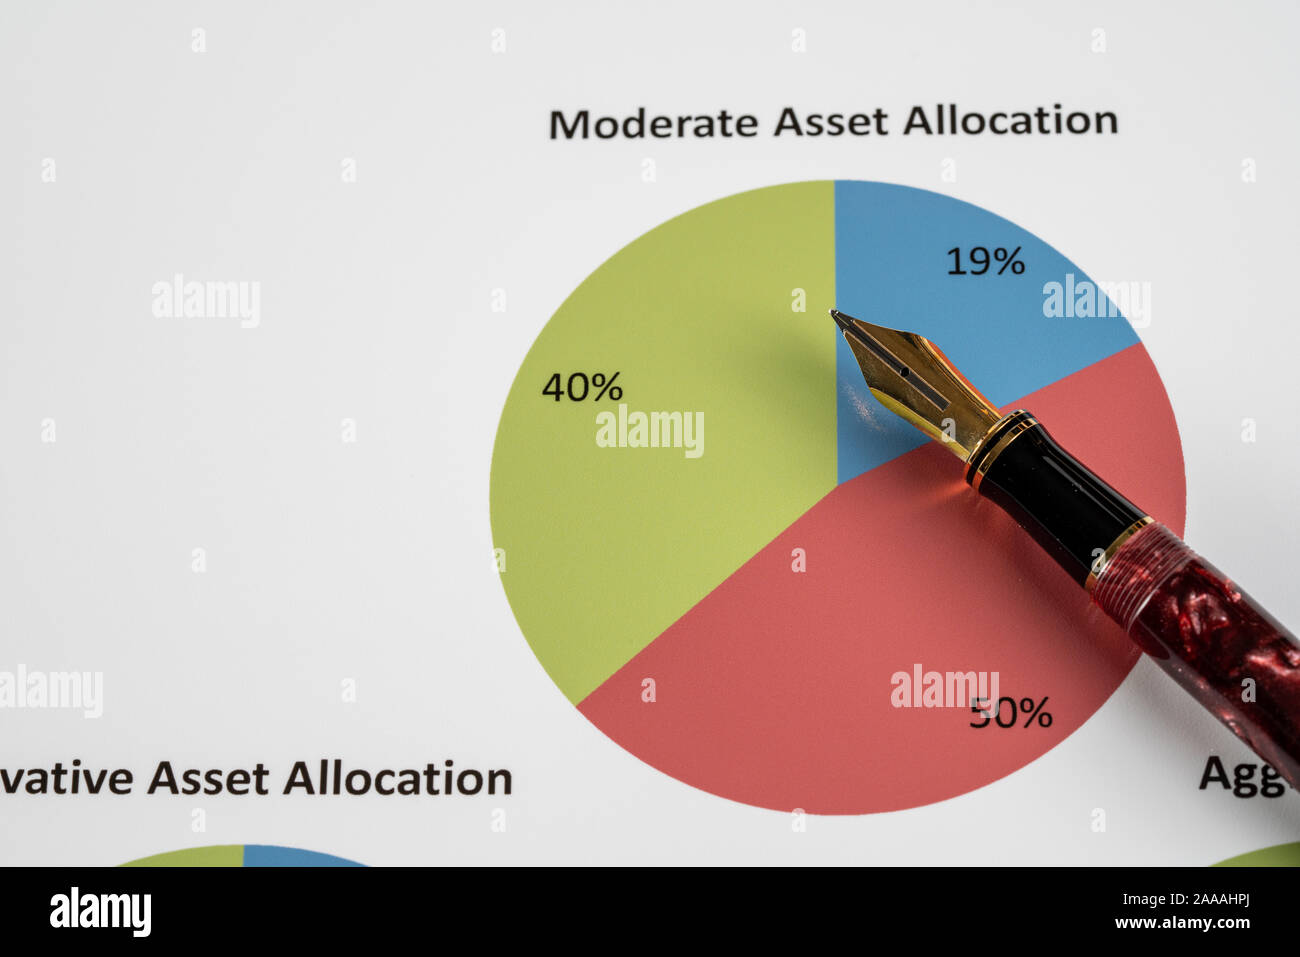 Expensive gold fountain pen pointing to moderate asset allocation pie chart on desk Stock Photo